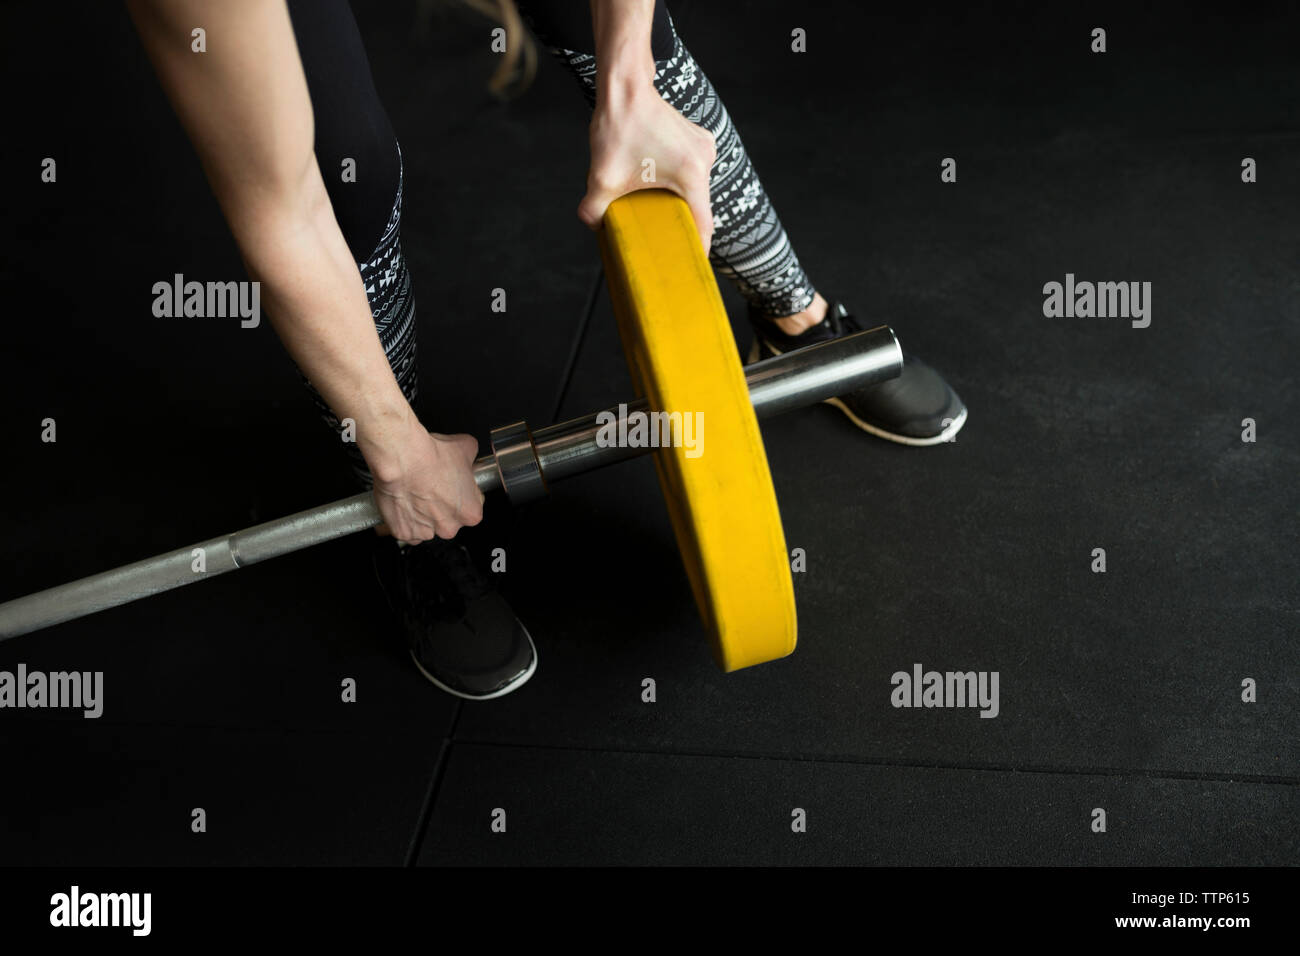 Low section of woman adjusting weight on barbell while exercising in gym Stock Photo